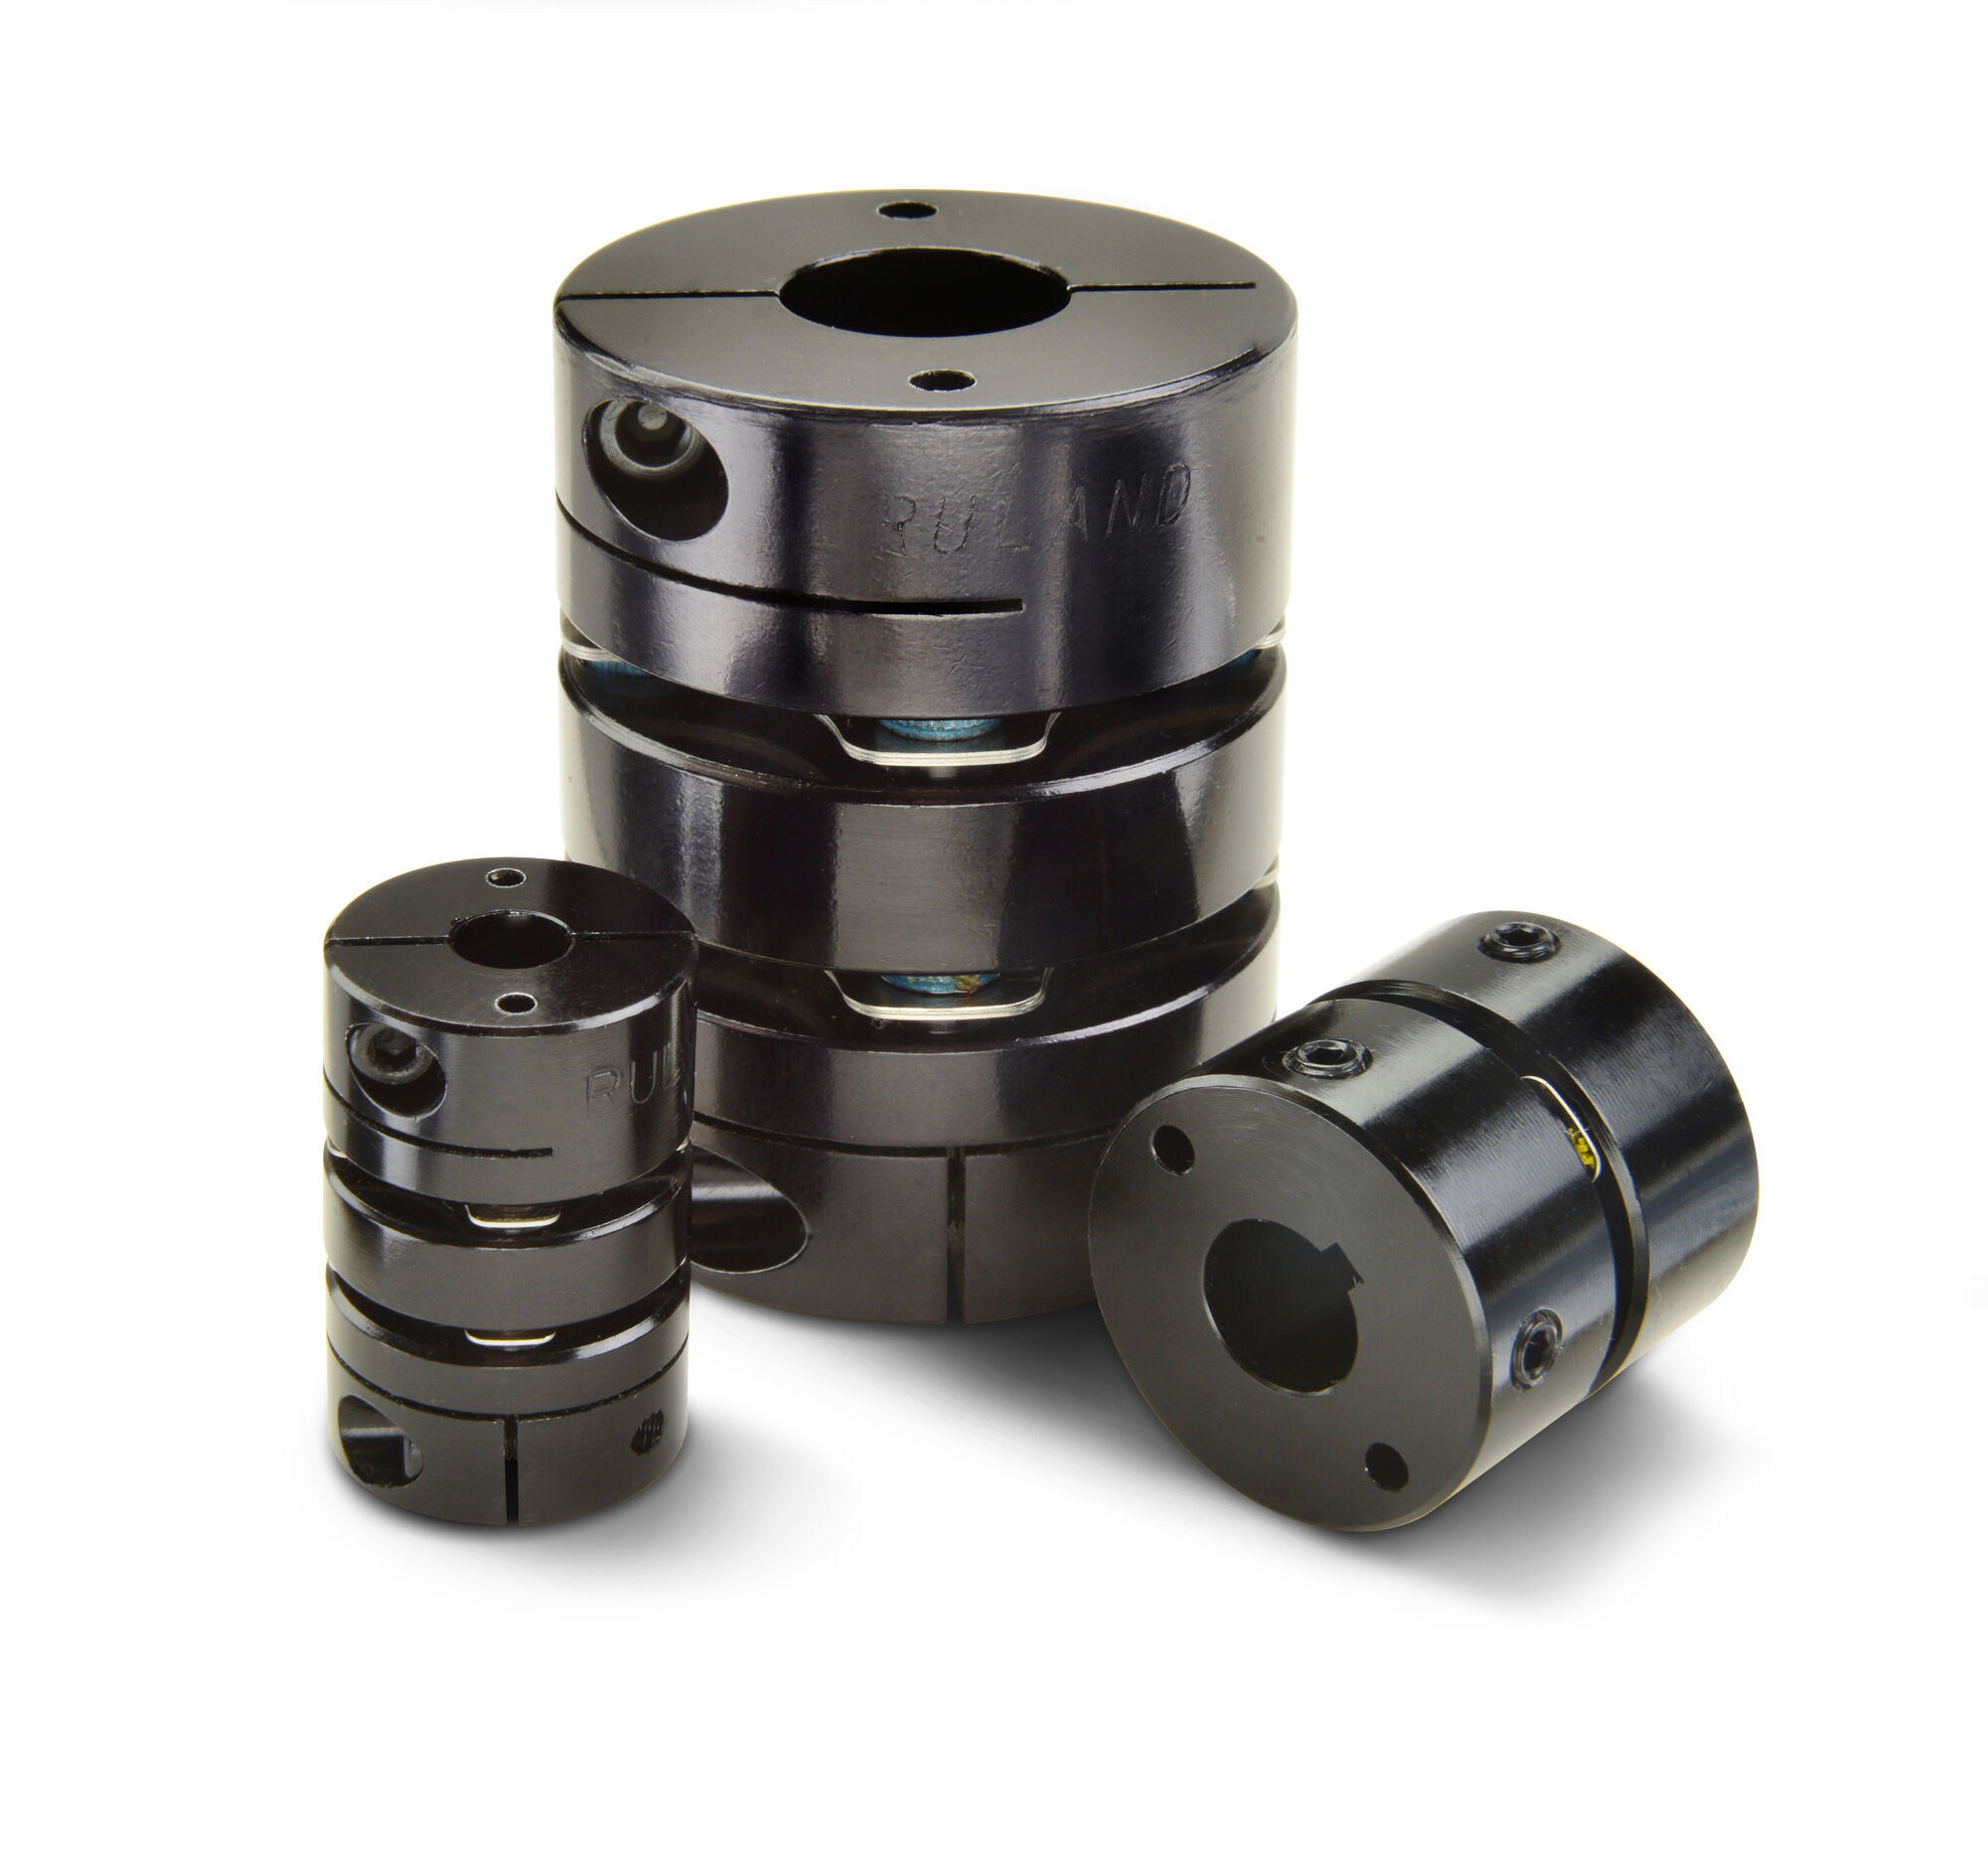 Zero-backlash disc couplings from Ruland: Coupling performance tailored to the requirements of test, measurement and inspection systems